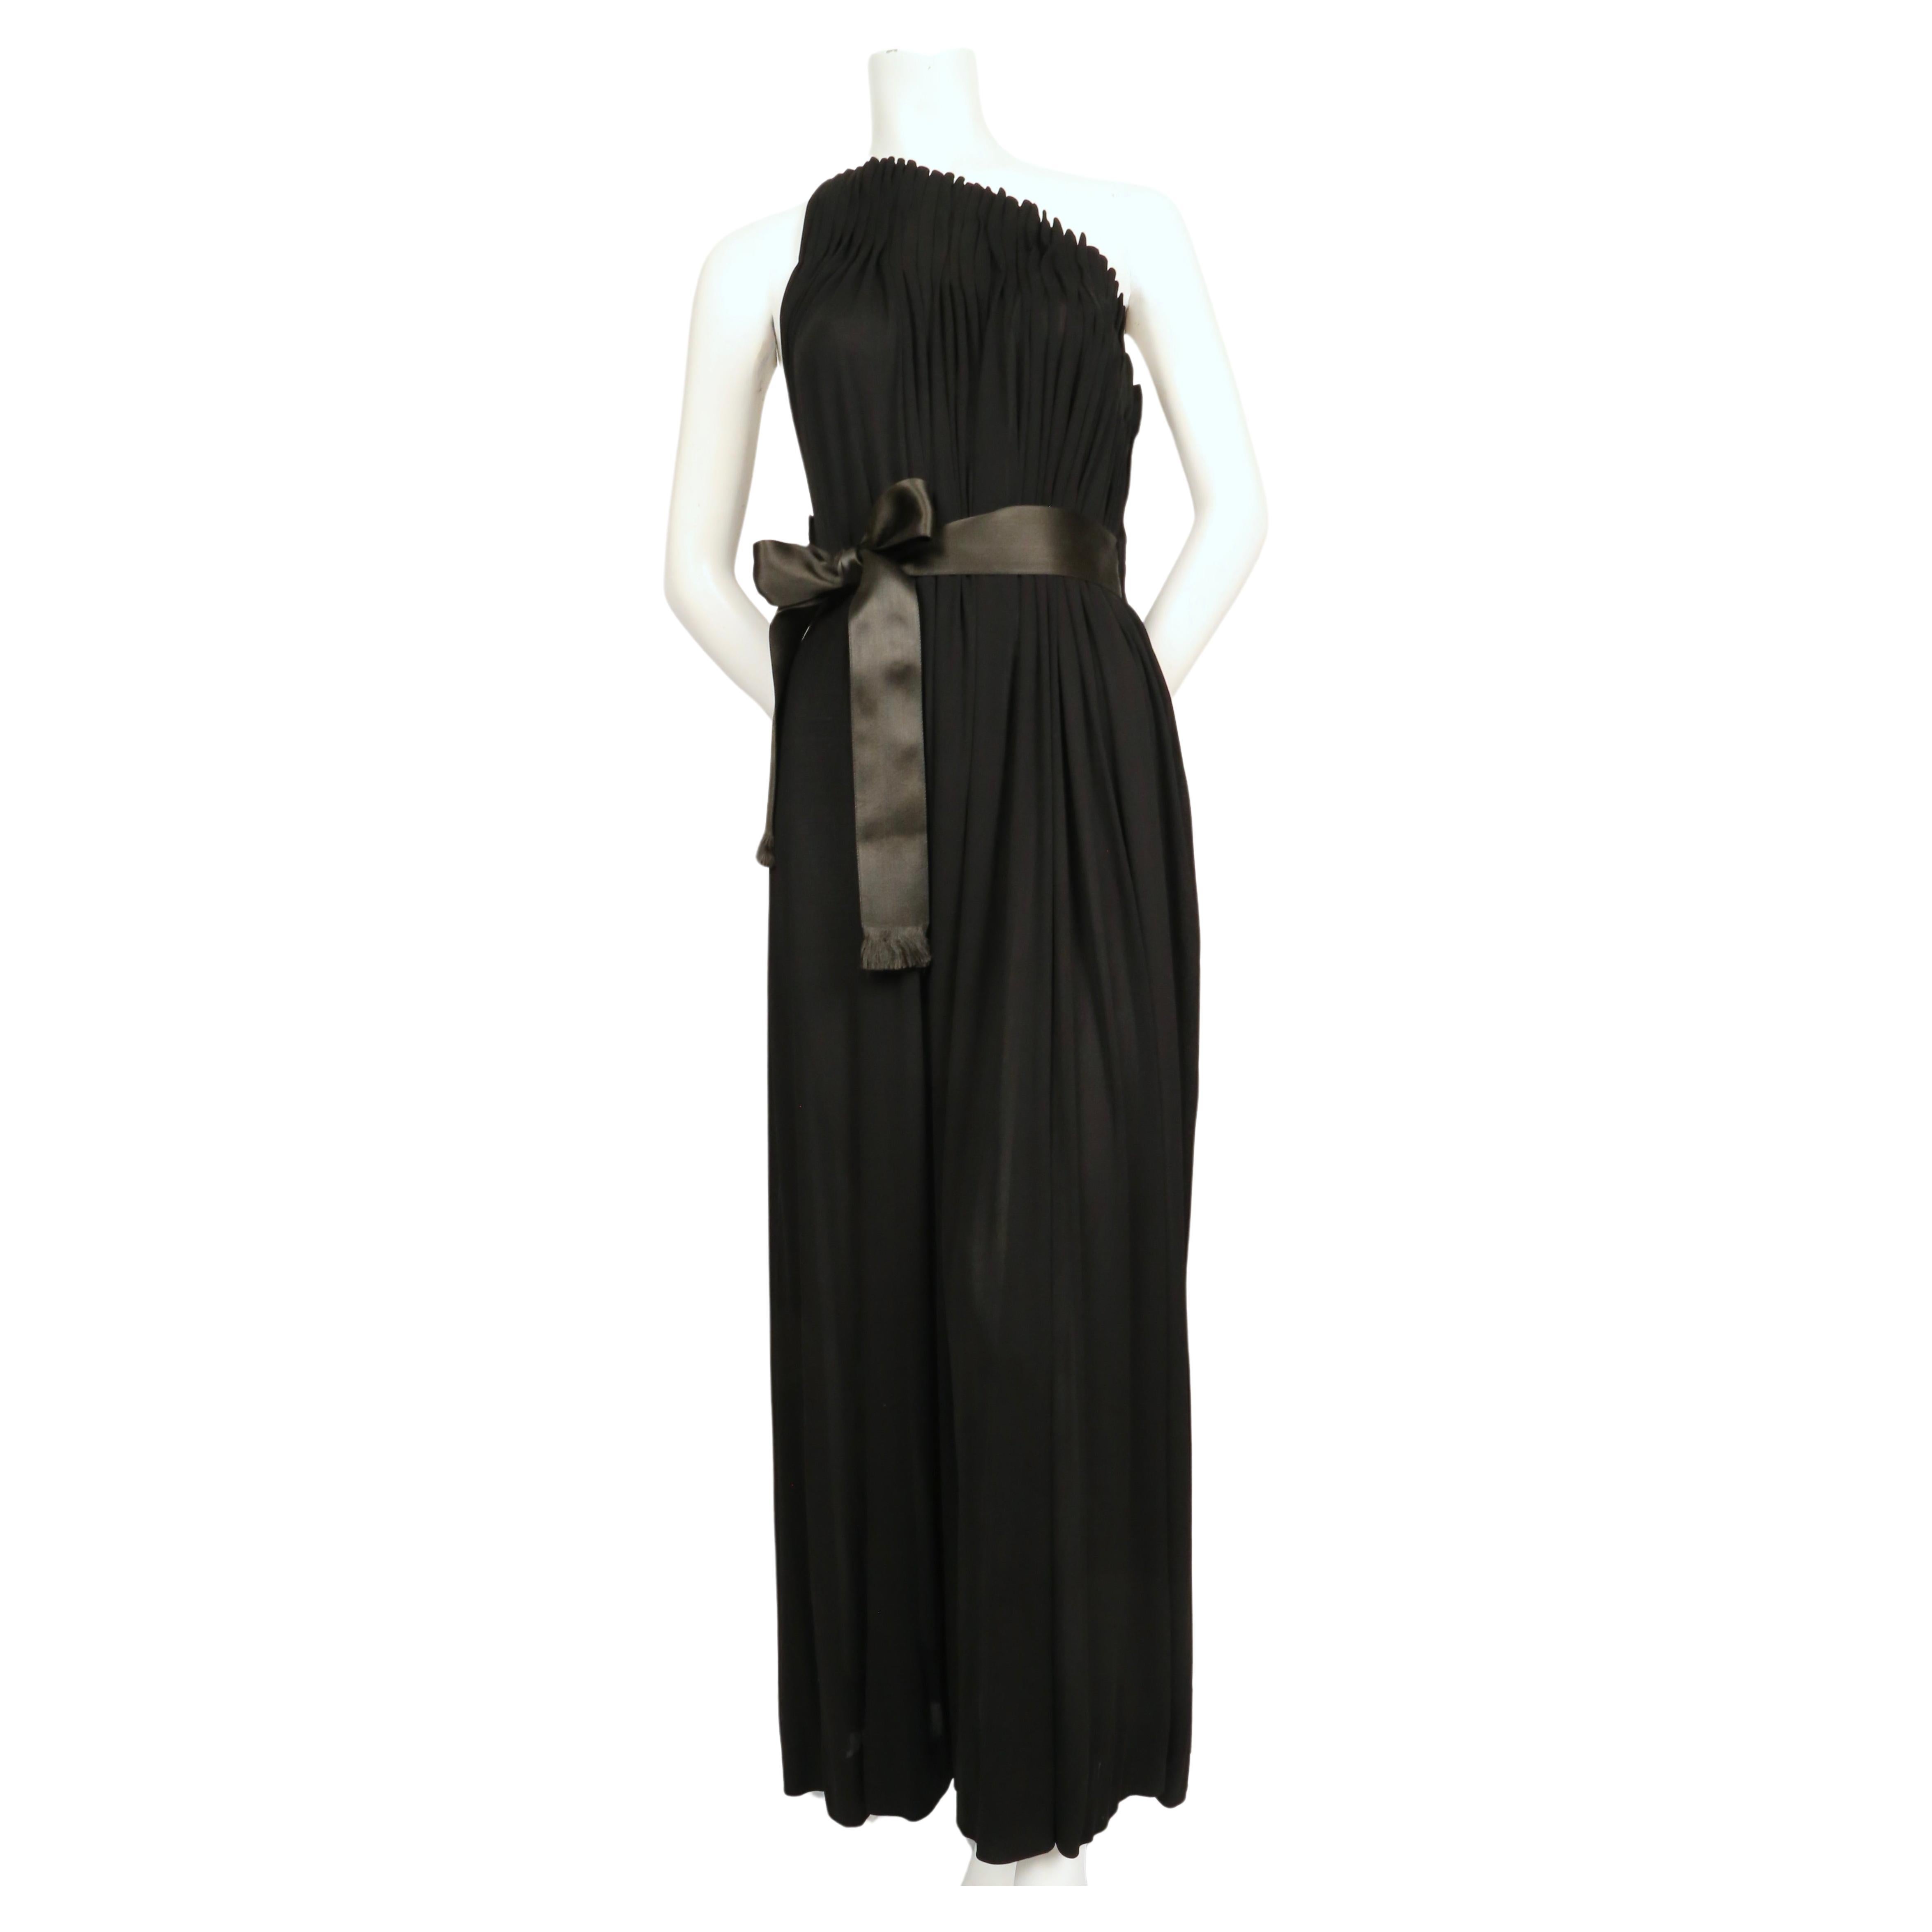 Stunning jet-black, silk jersey gown with fluted box pleated bodice from James Galanos dating to the 1970's. Dress has a very strong silhouette with a very unique asymmetrical high neckline with a single thin strap at back.  On either side of the